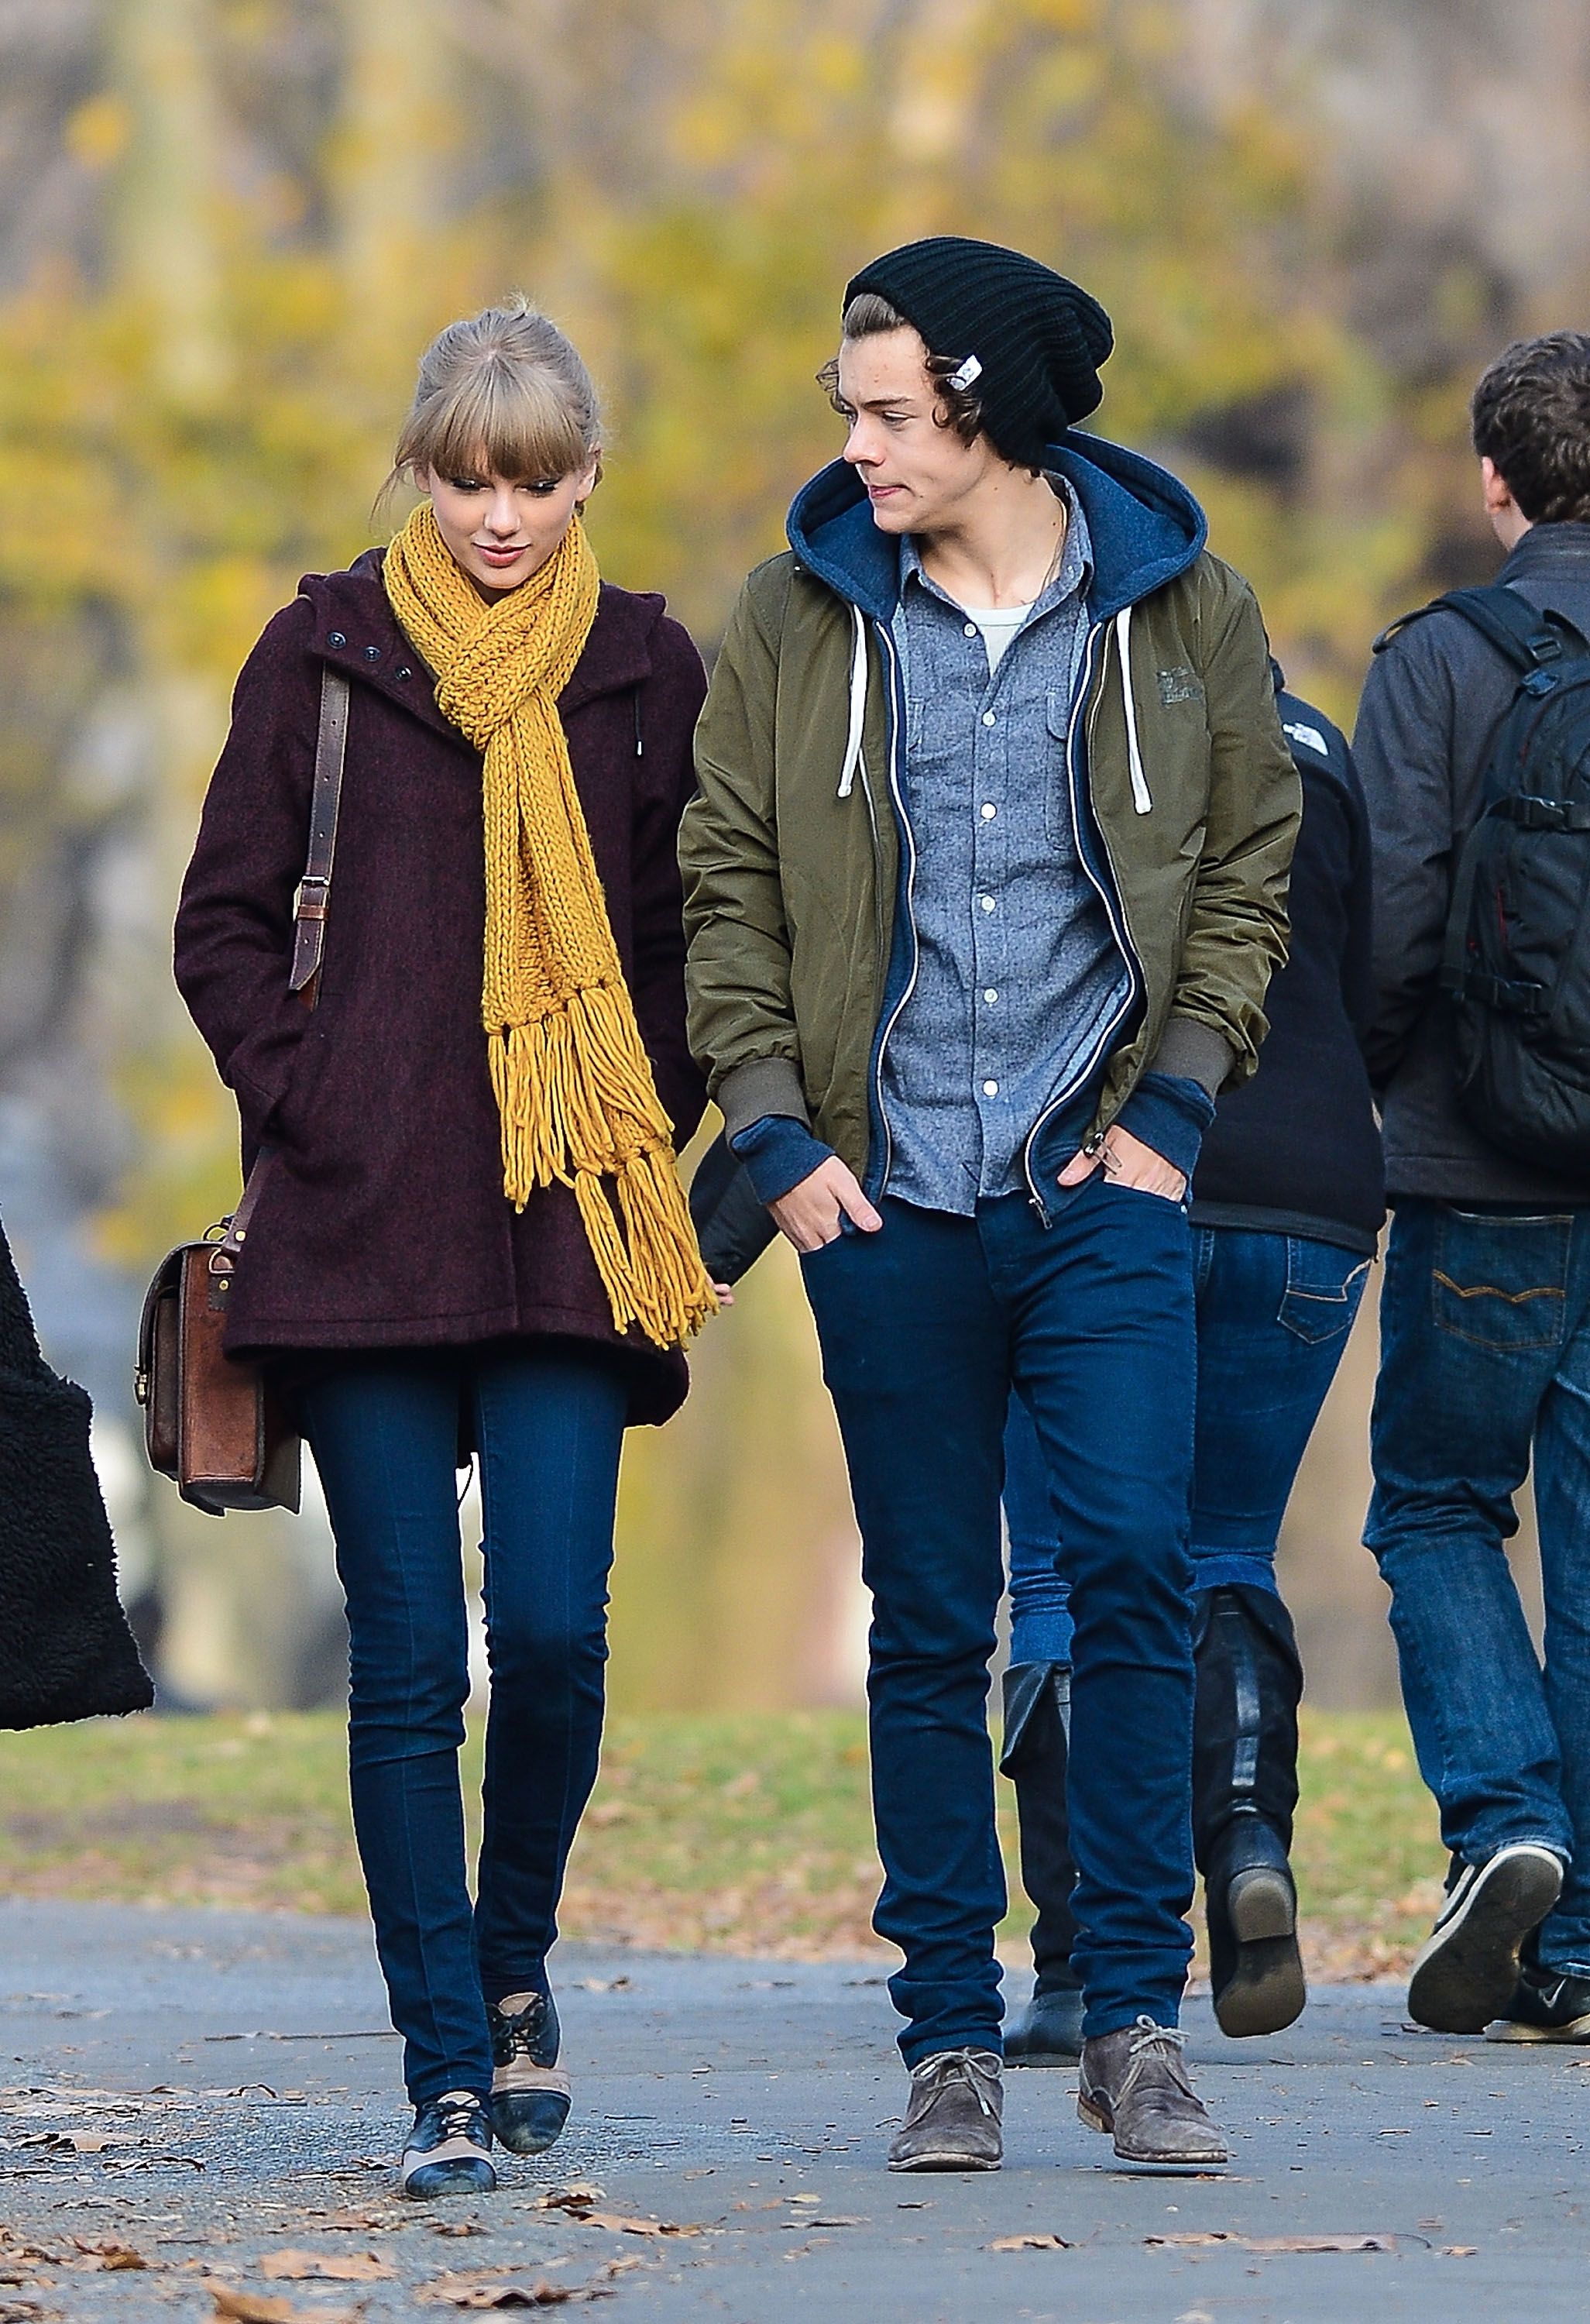 Taylor Swift's dating history: Full list of famous boyfriends